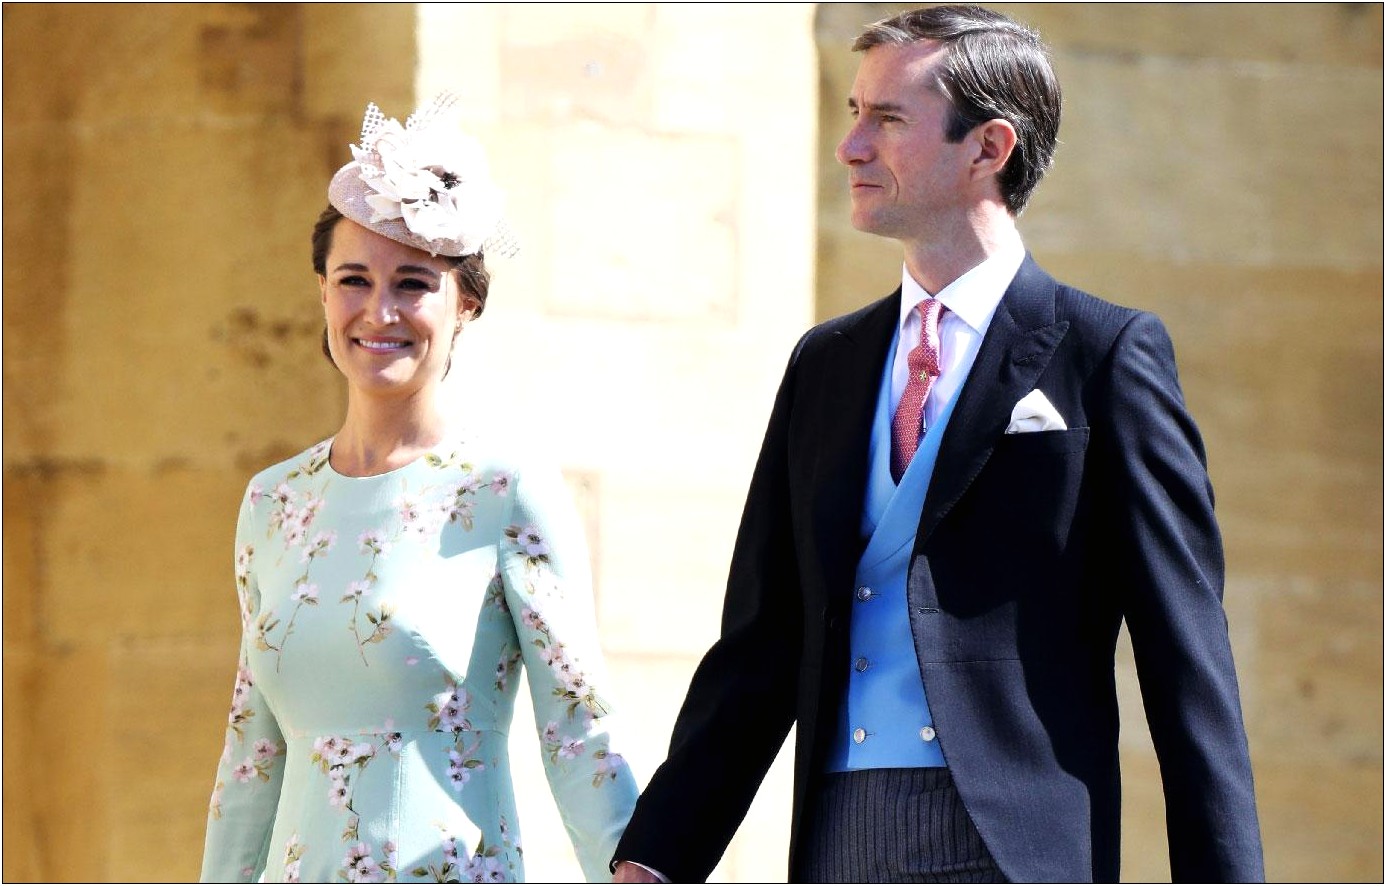 Is Pippa Middleton Invited To Royal Wedding